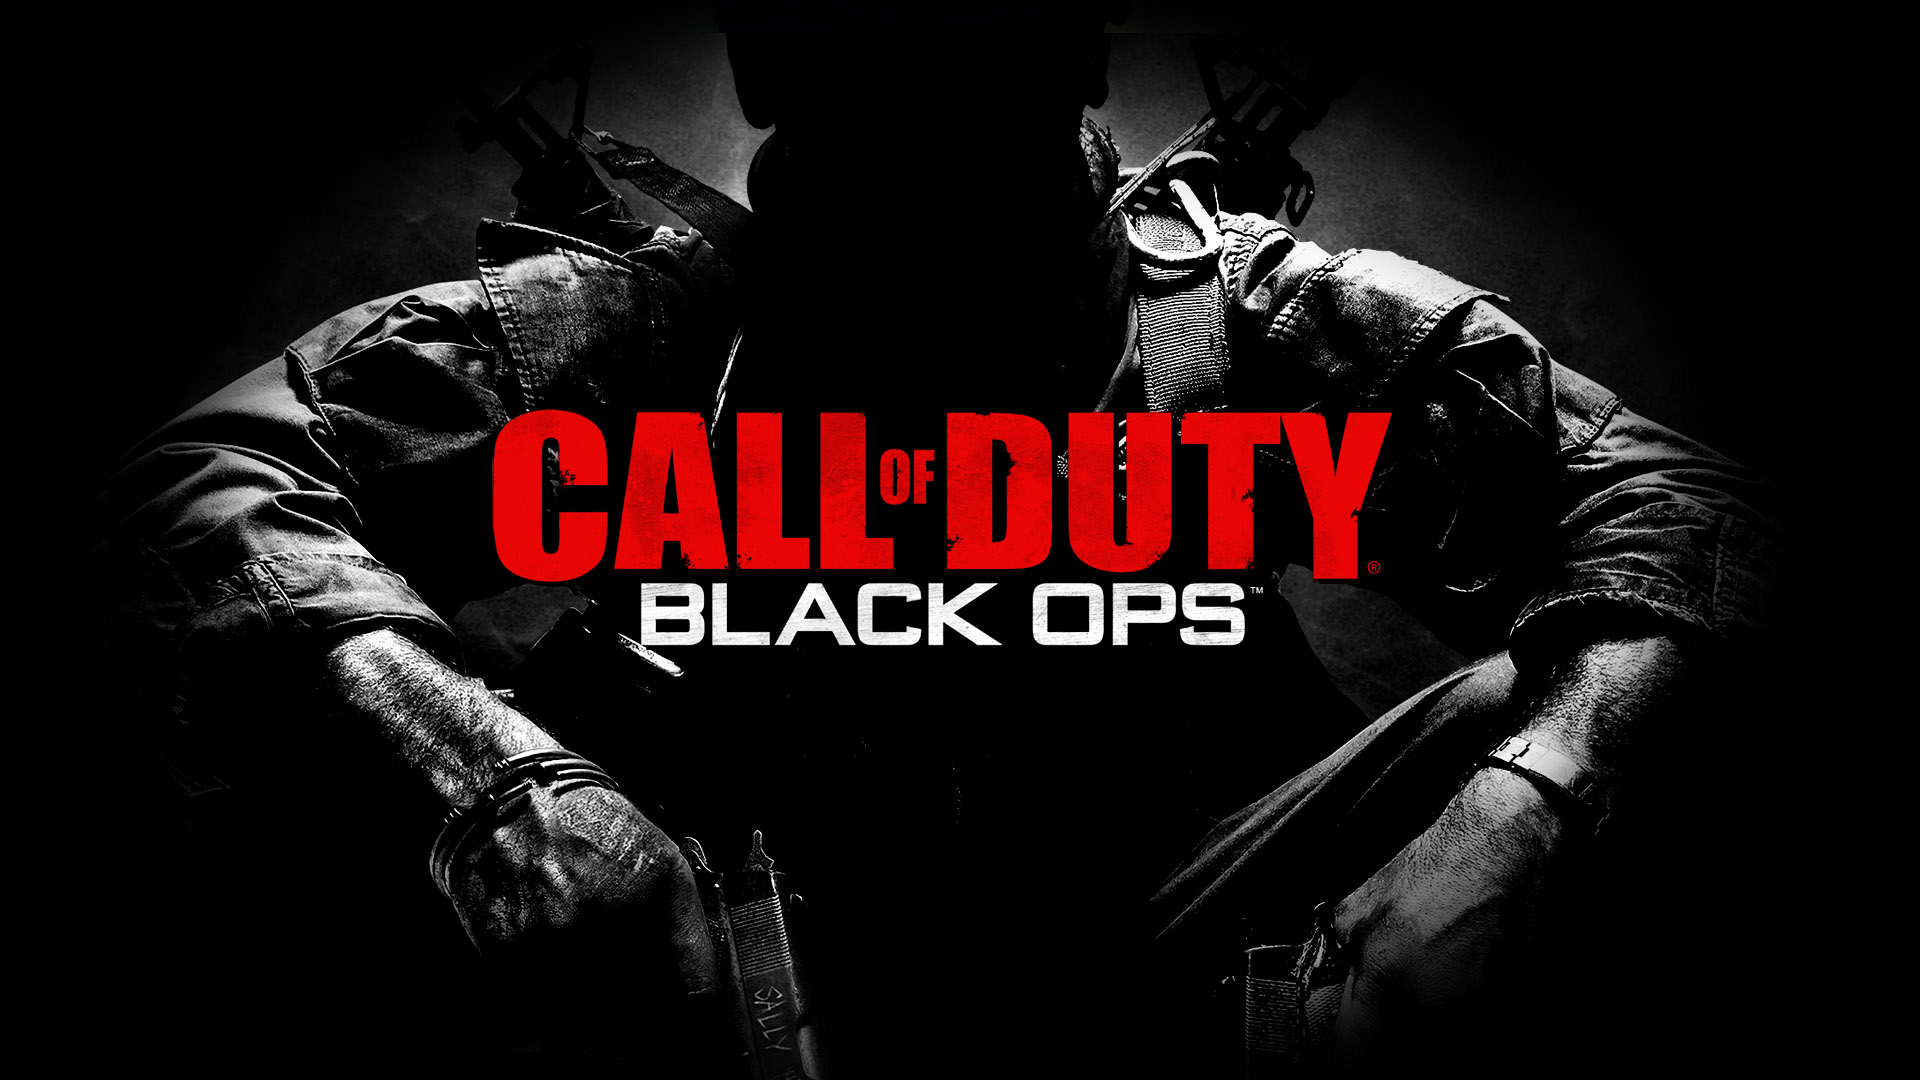 Call Of Duty Black Ops Red Label 1920x1080 HD Image Games 1920x1080